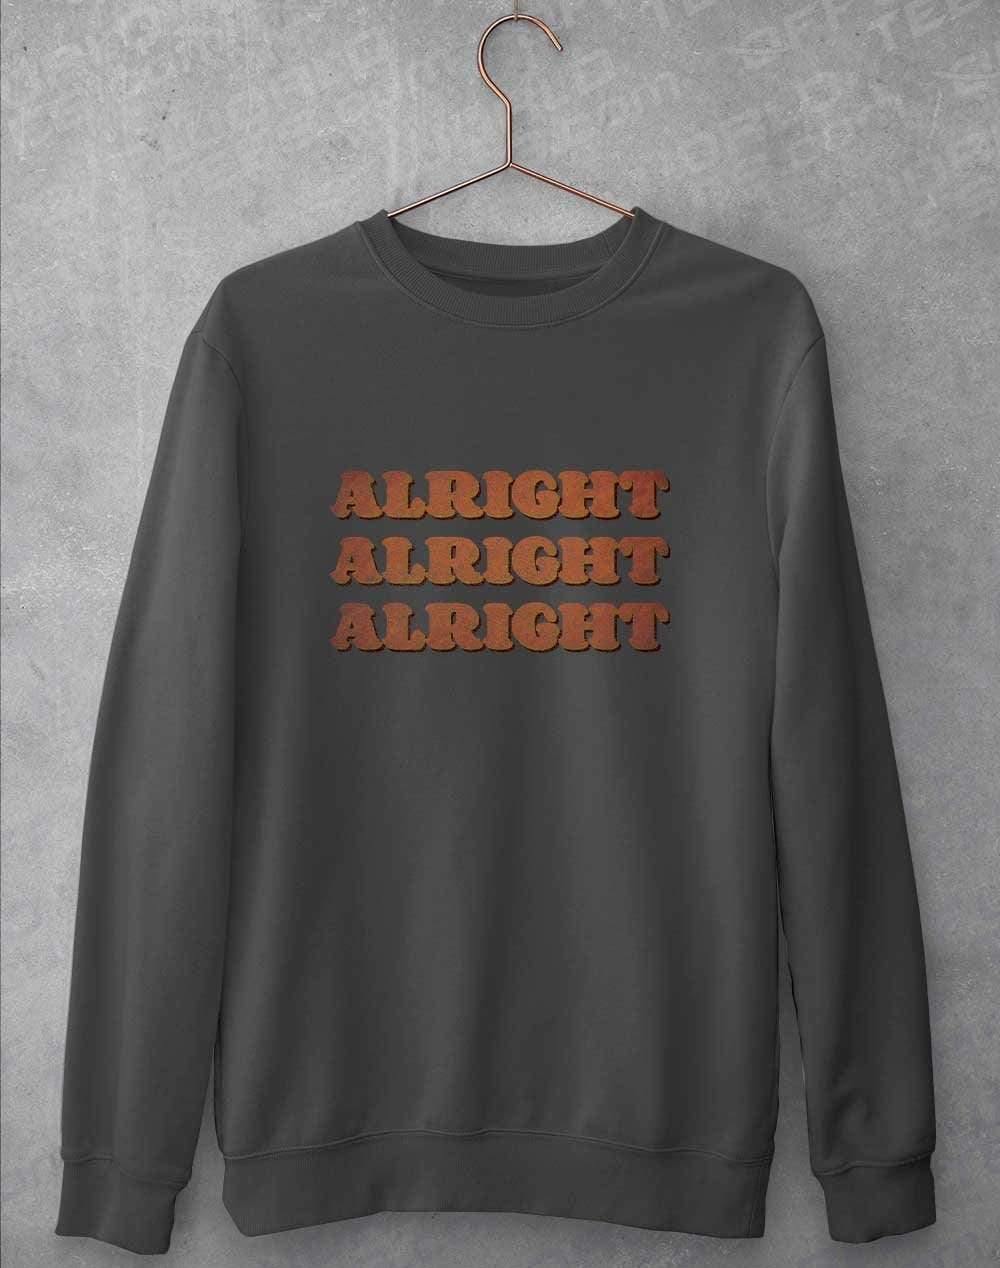 Alright Alright Alright Sweatshirt S / Charcoal  - Off World Tees